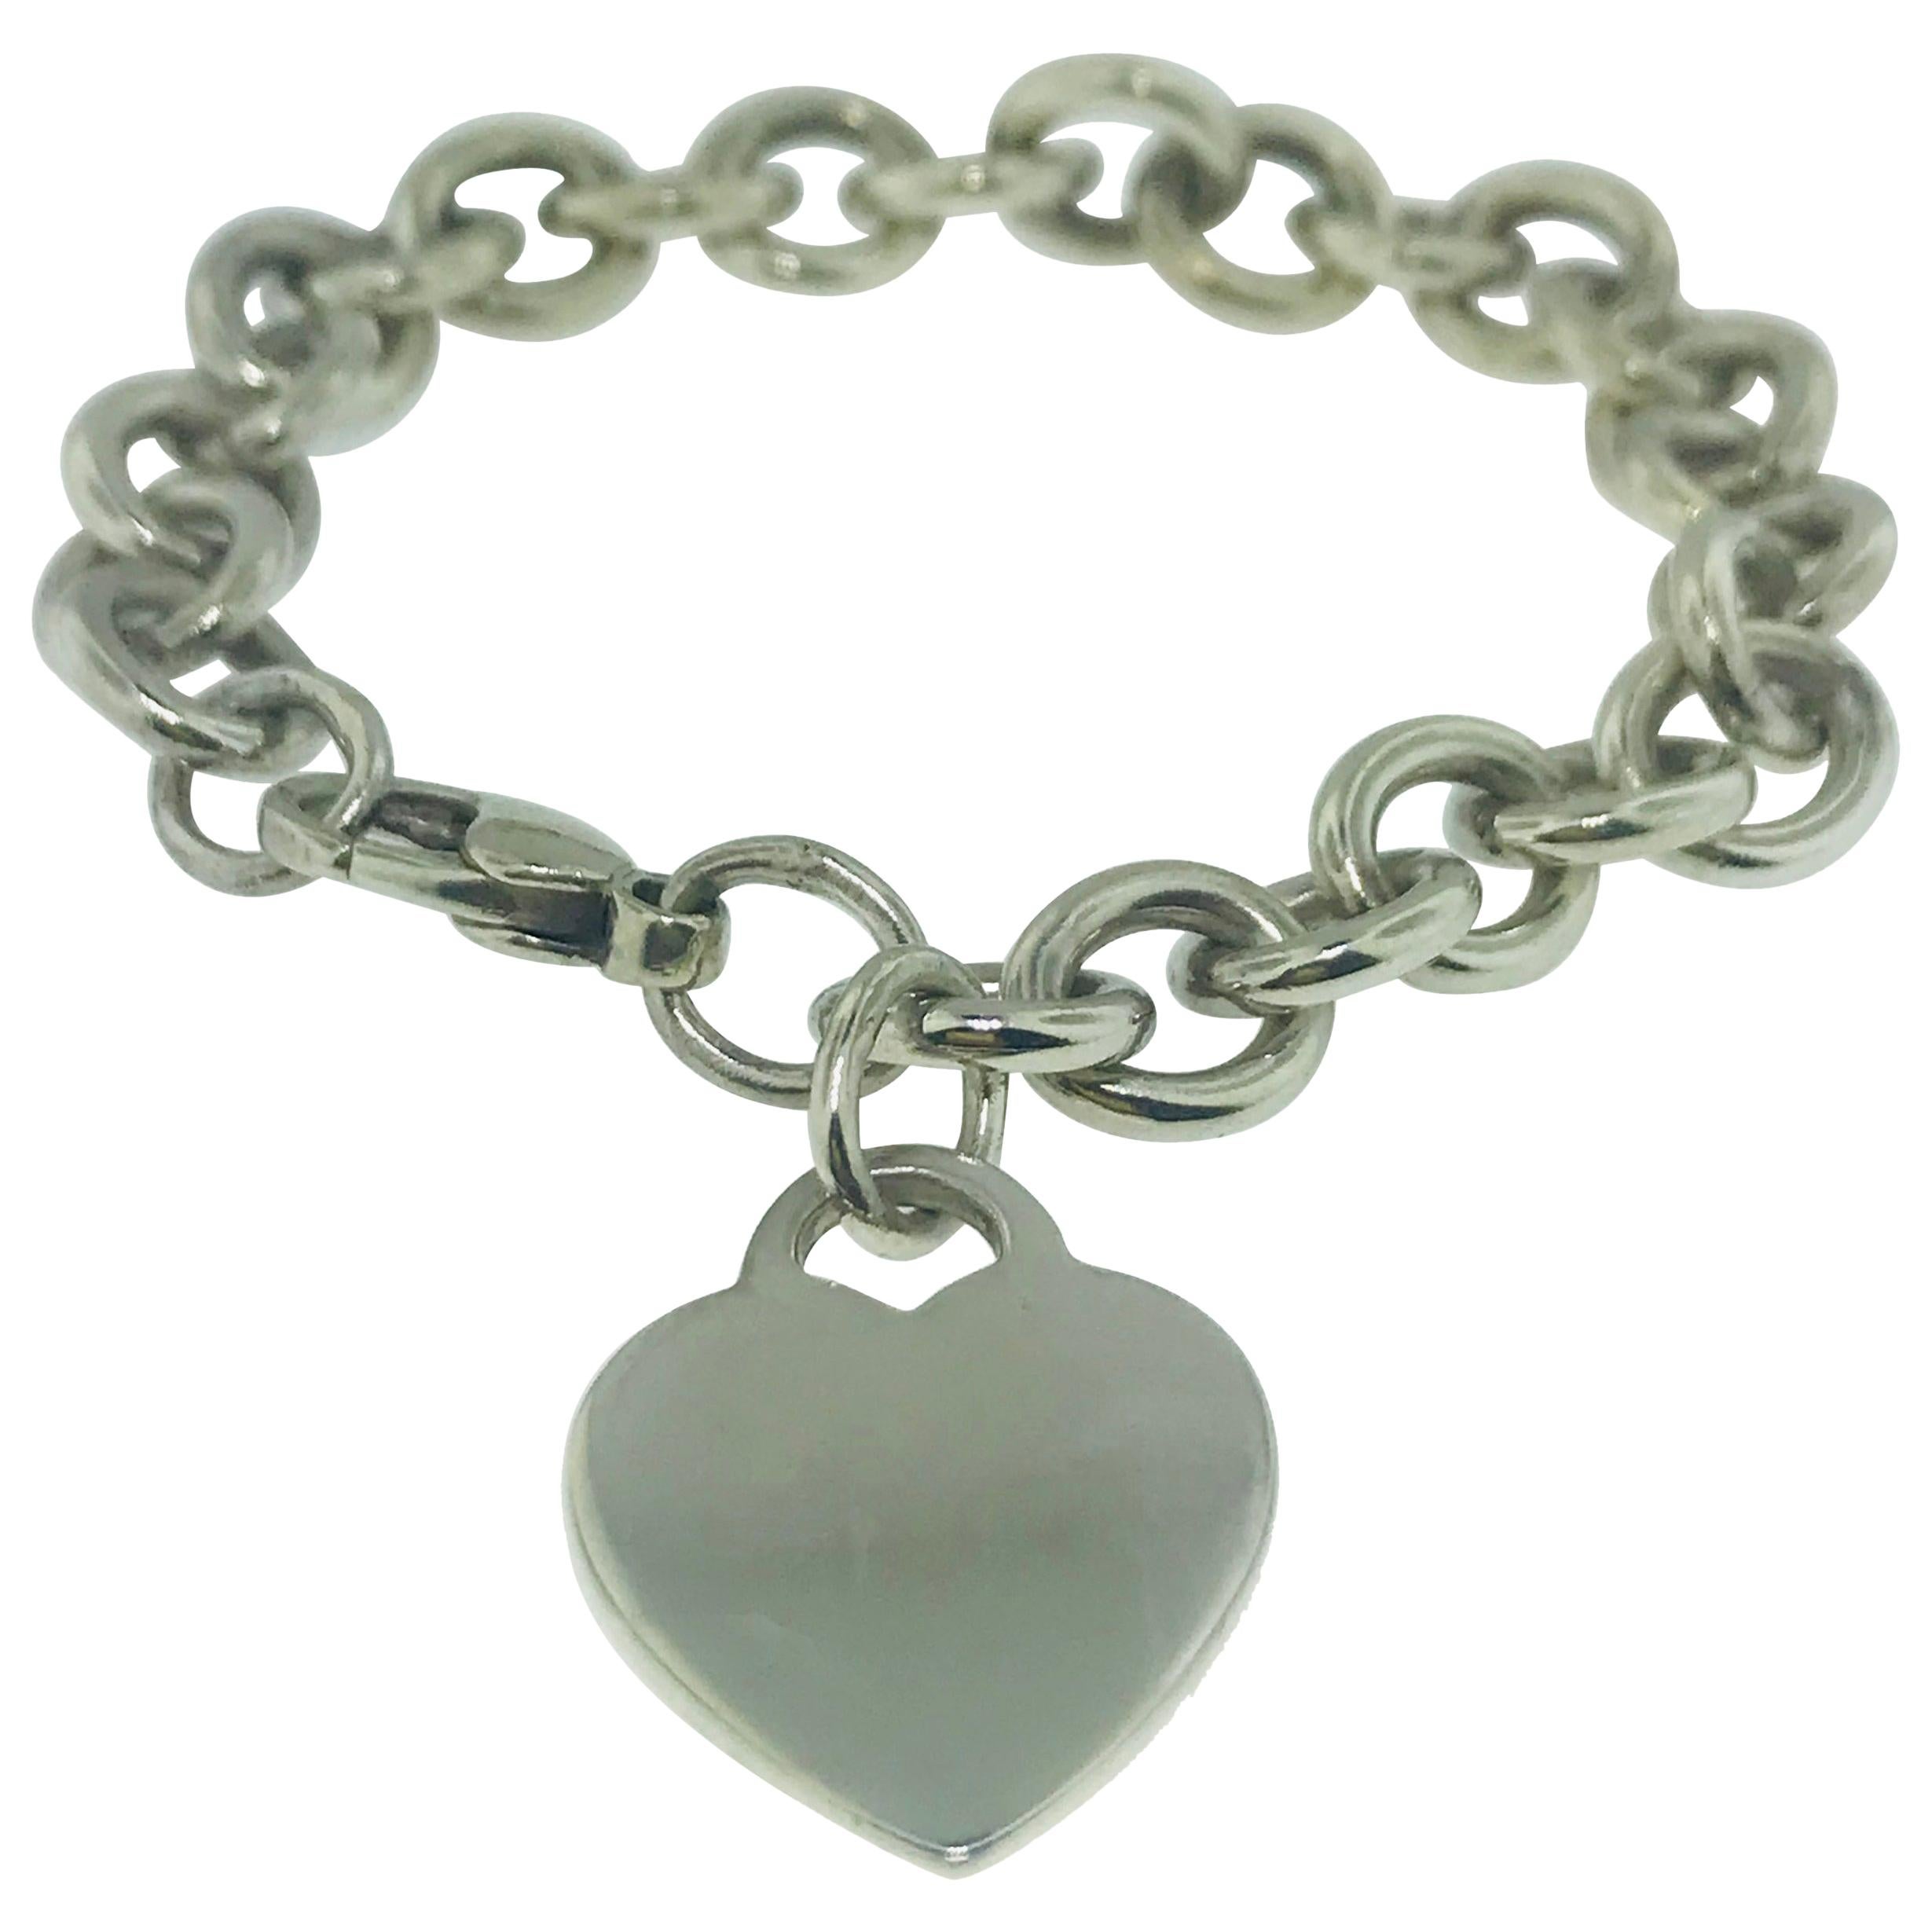 Tiffany & Co. Charm Bracelet with Heart Charm in Sterling Silver